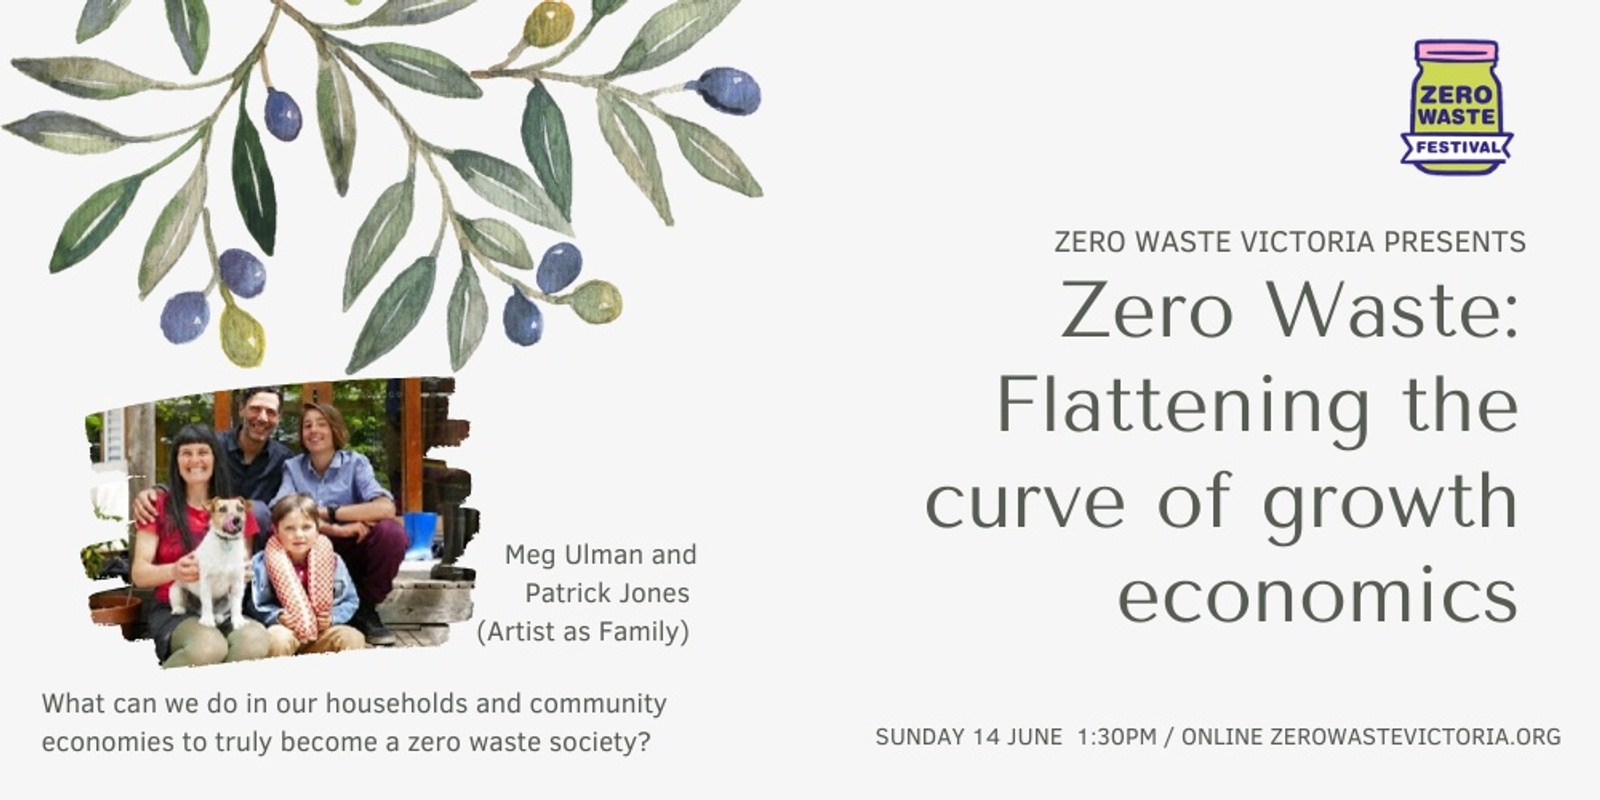 Banner image for Zero Waste: Flattening the curve of growth economics in households and community for a zero waste society